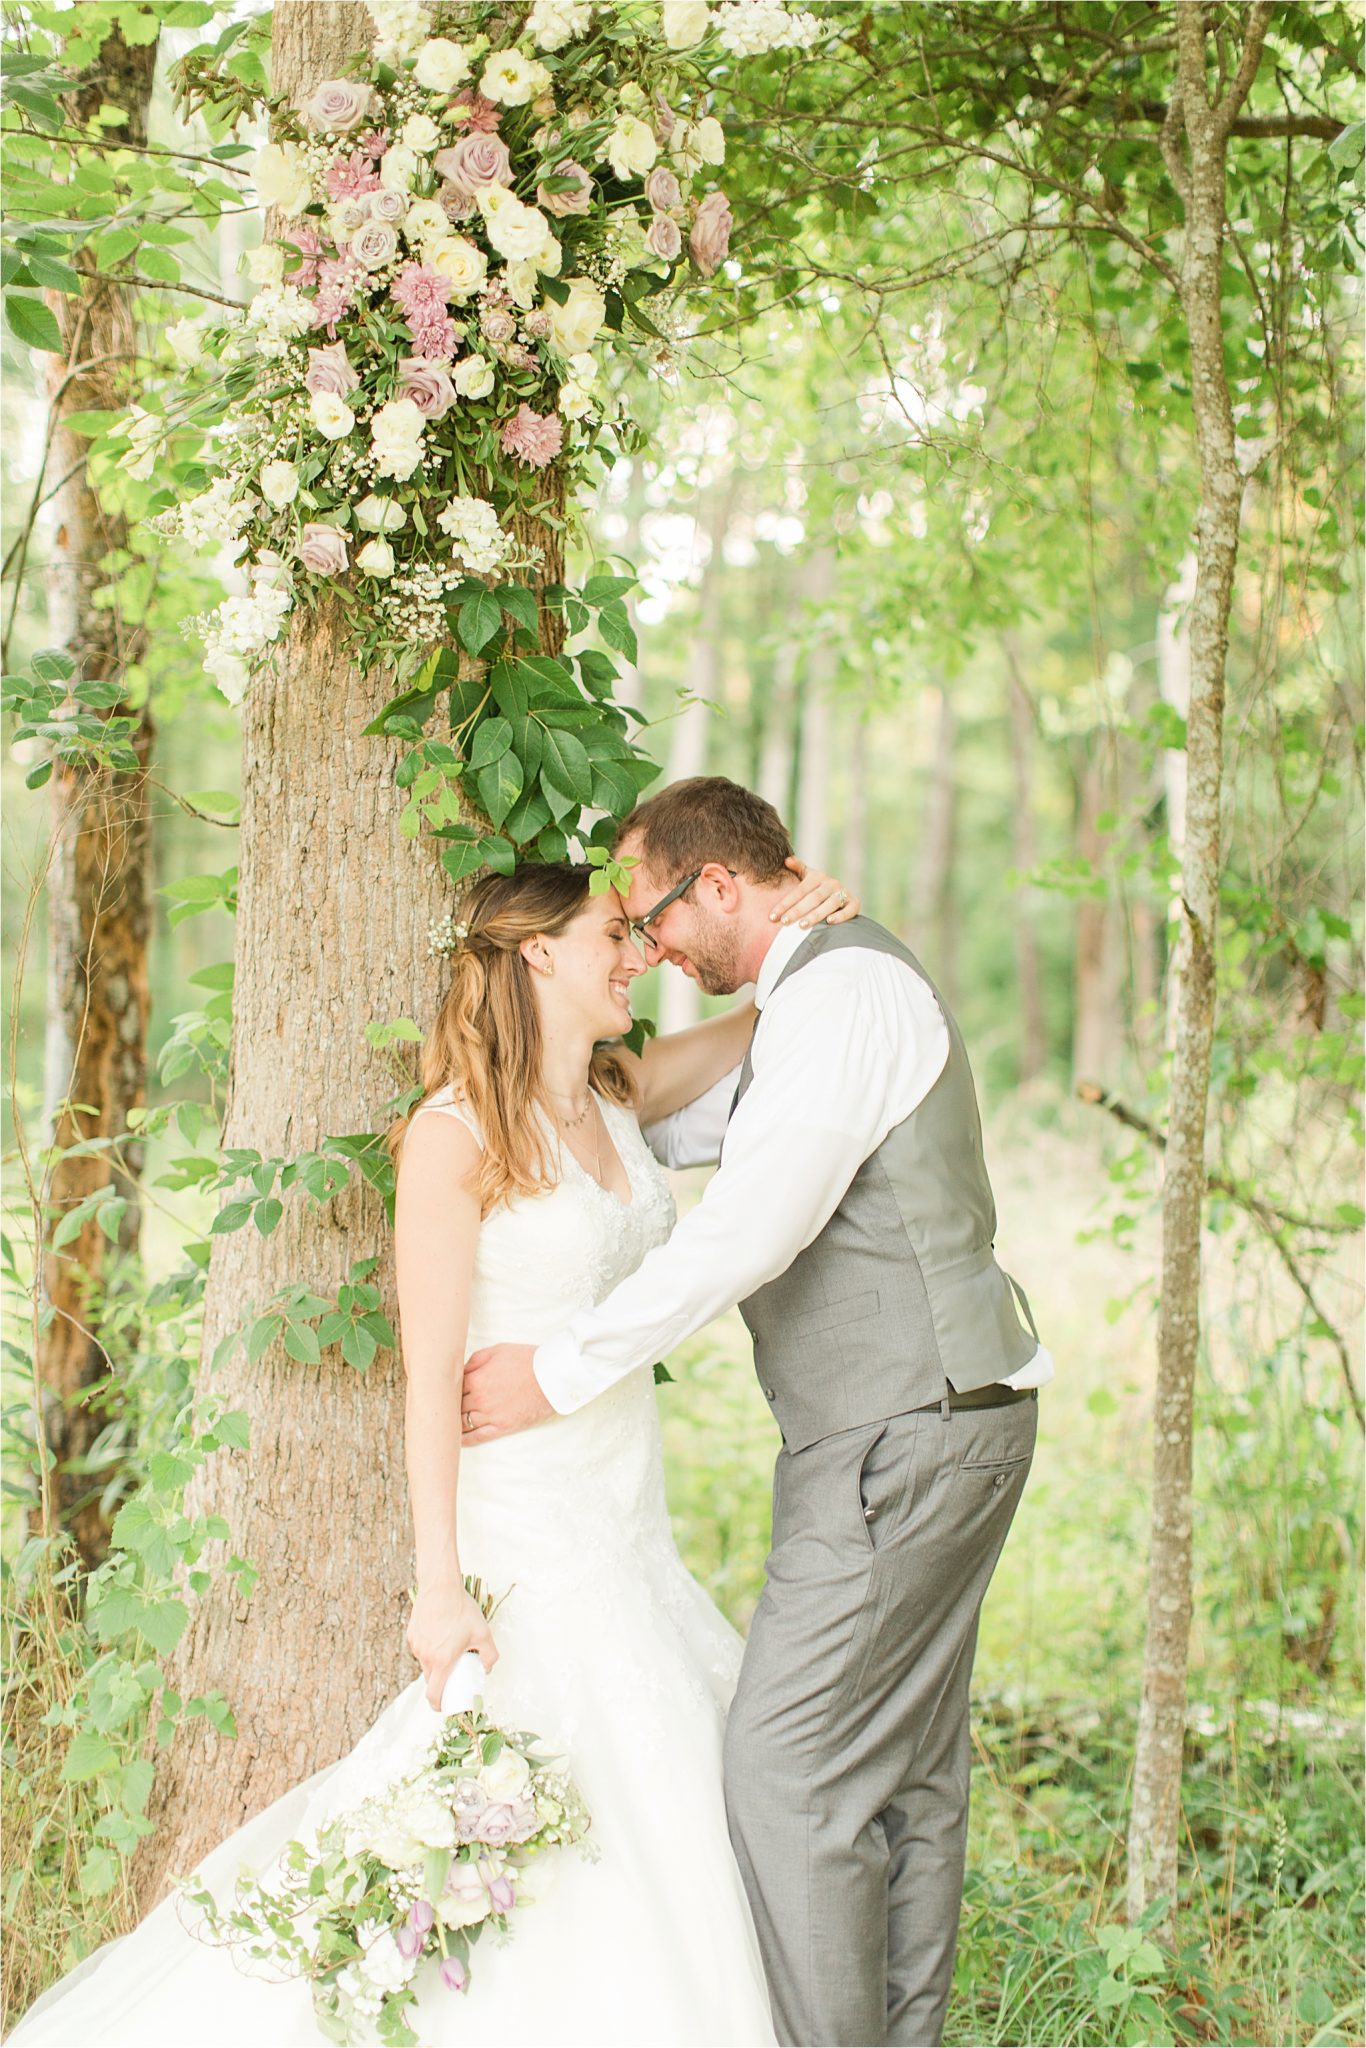 decorate trees with wedding flowers-bride and groom portraits-wedding day-grey grooms suit-vest-lavender flowers